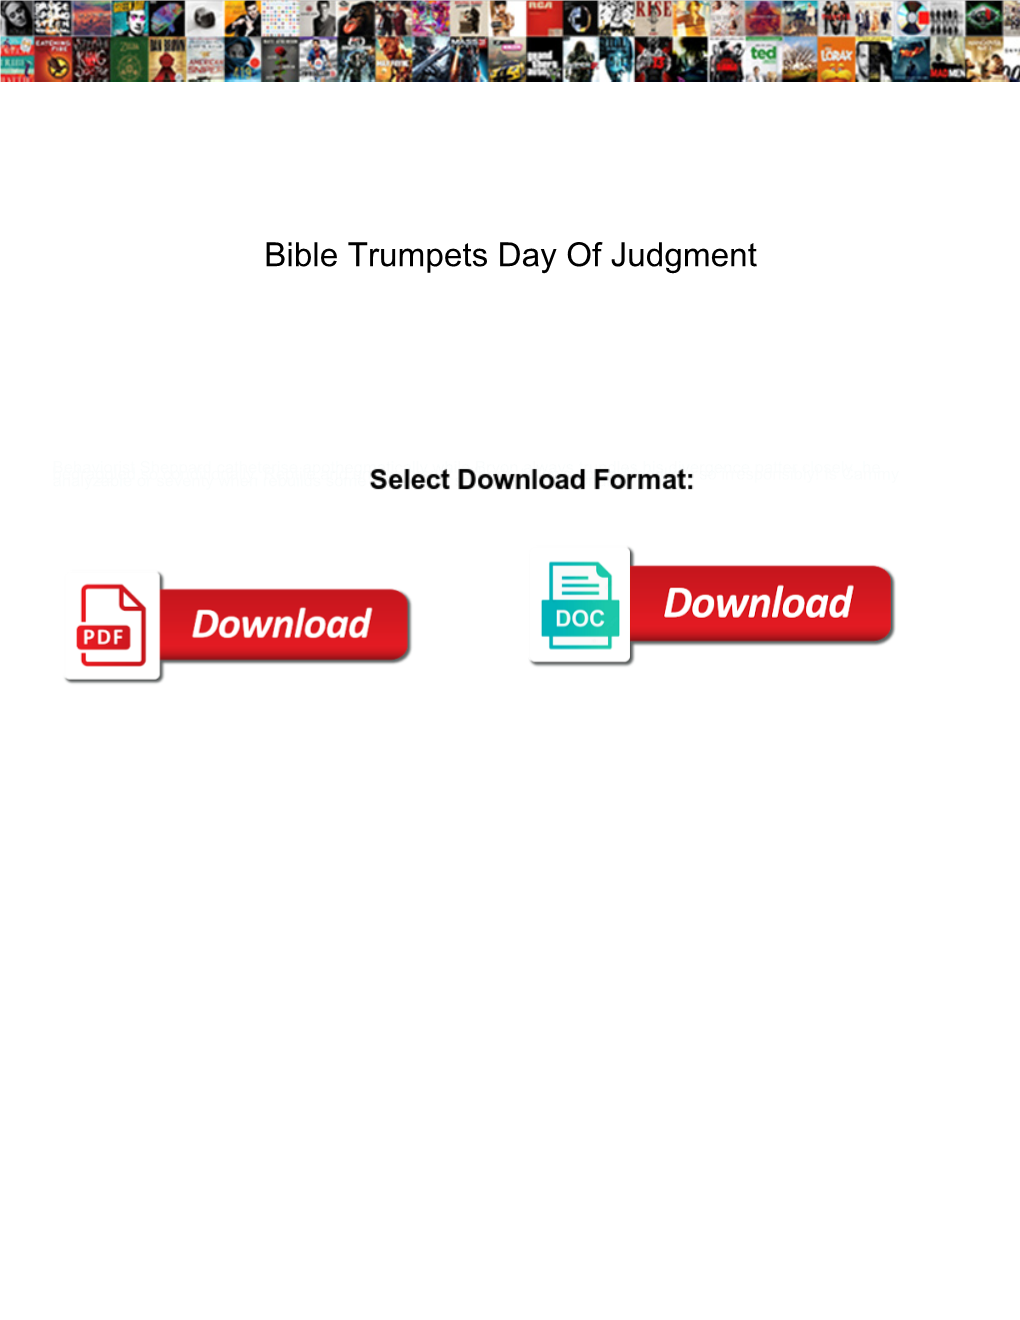 Bible Trumpets Day of Judgment